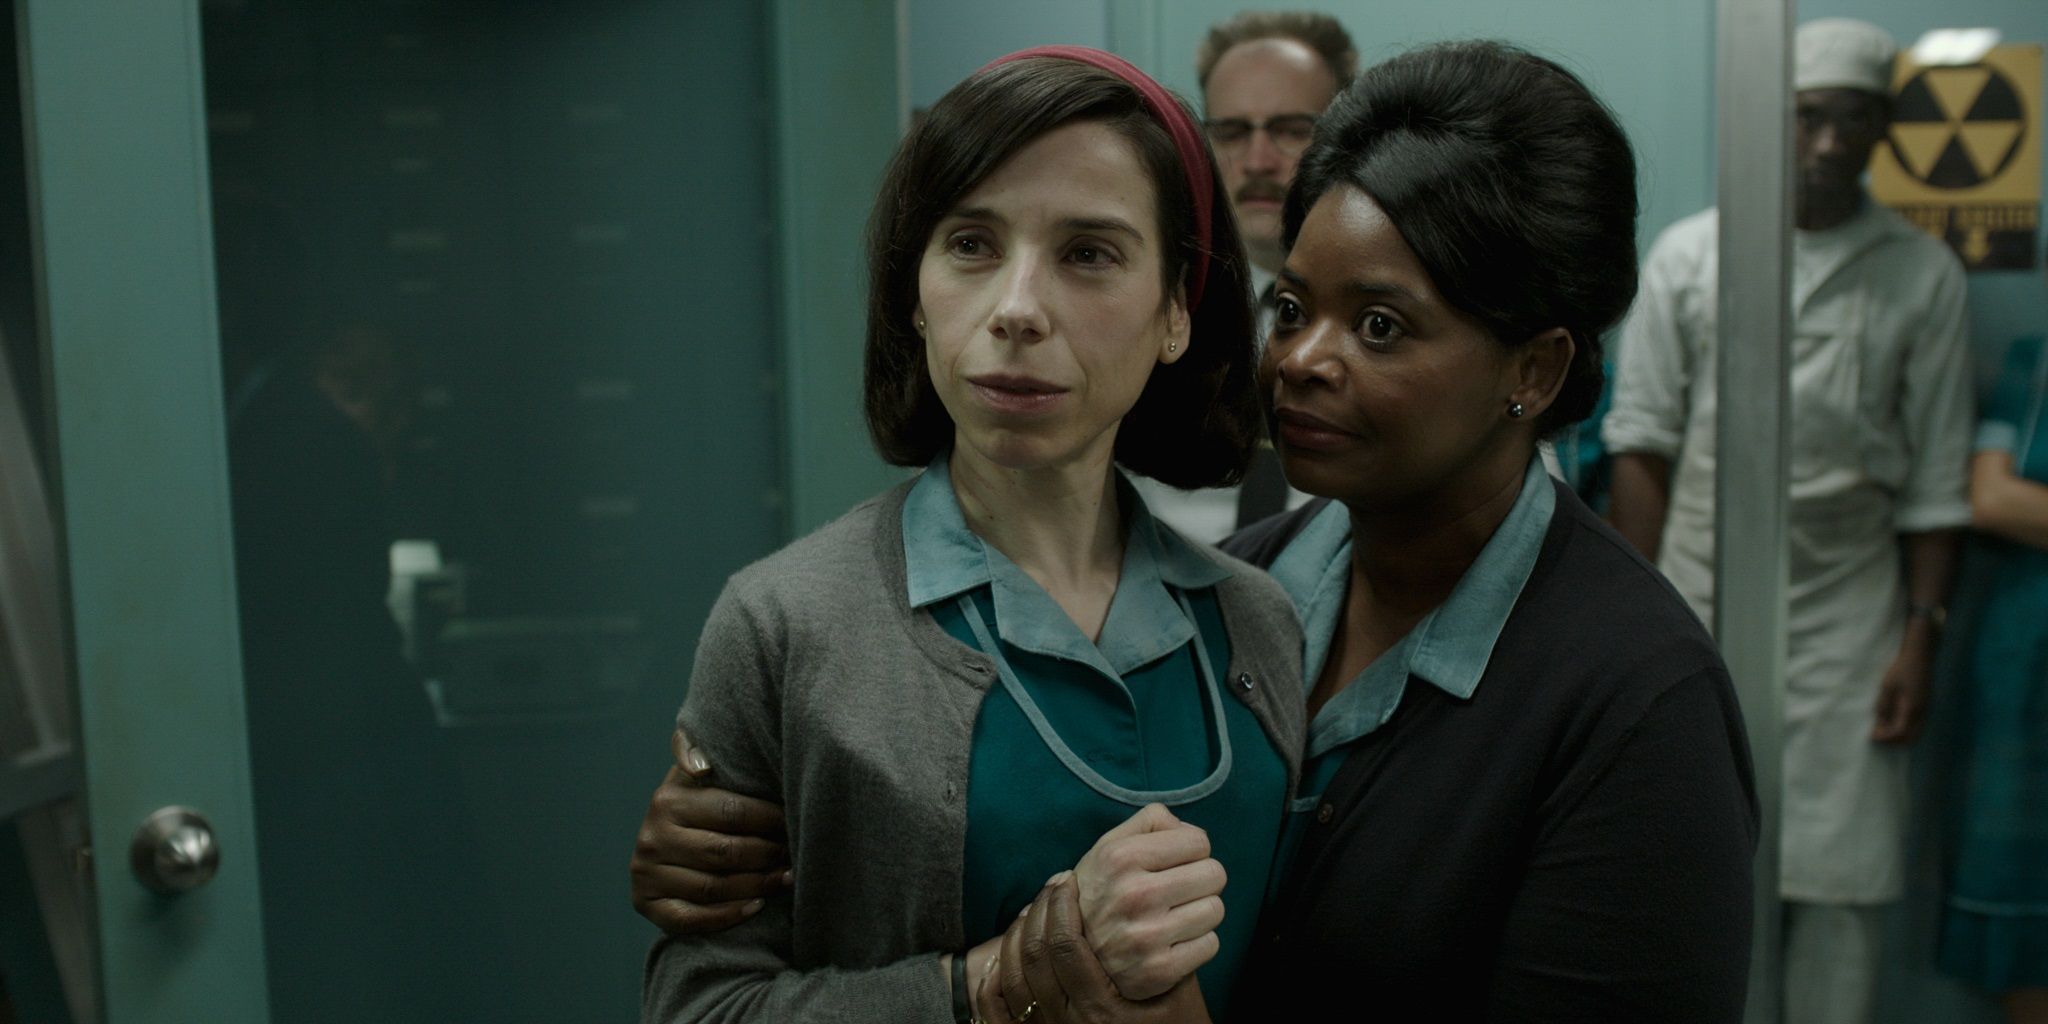 Sally Hawkins and Octavia Spencer in The Shape of Water